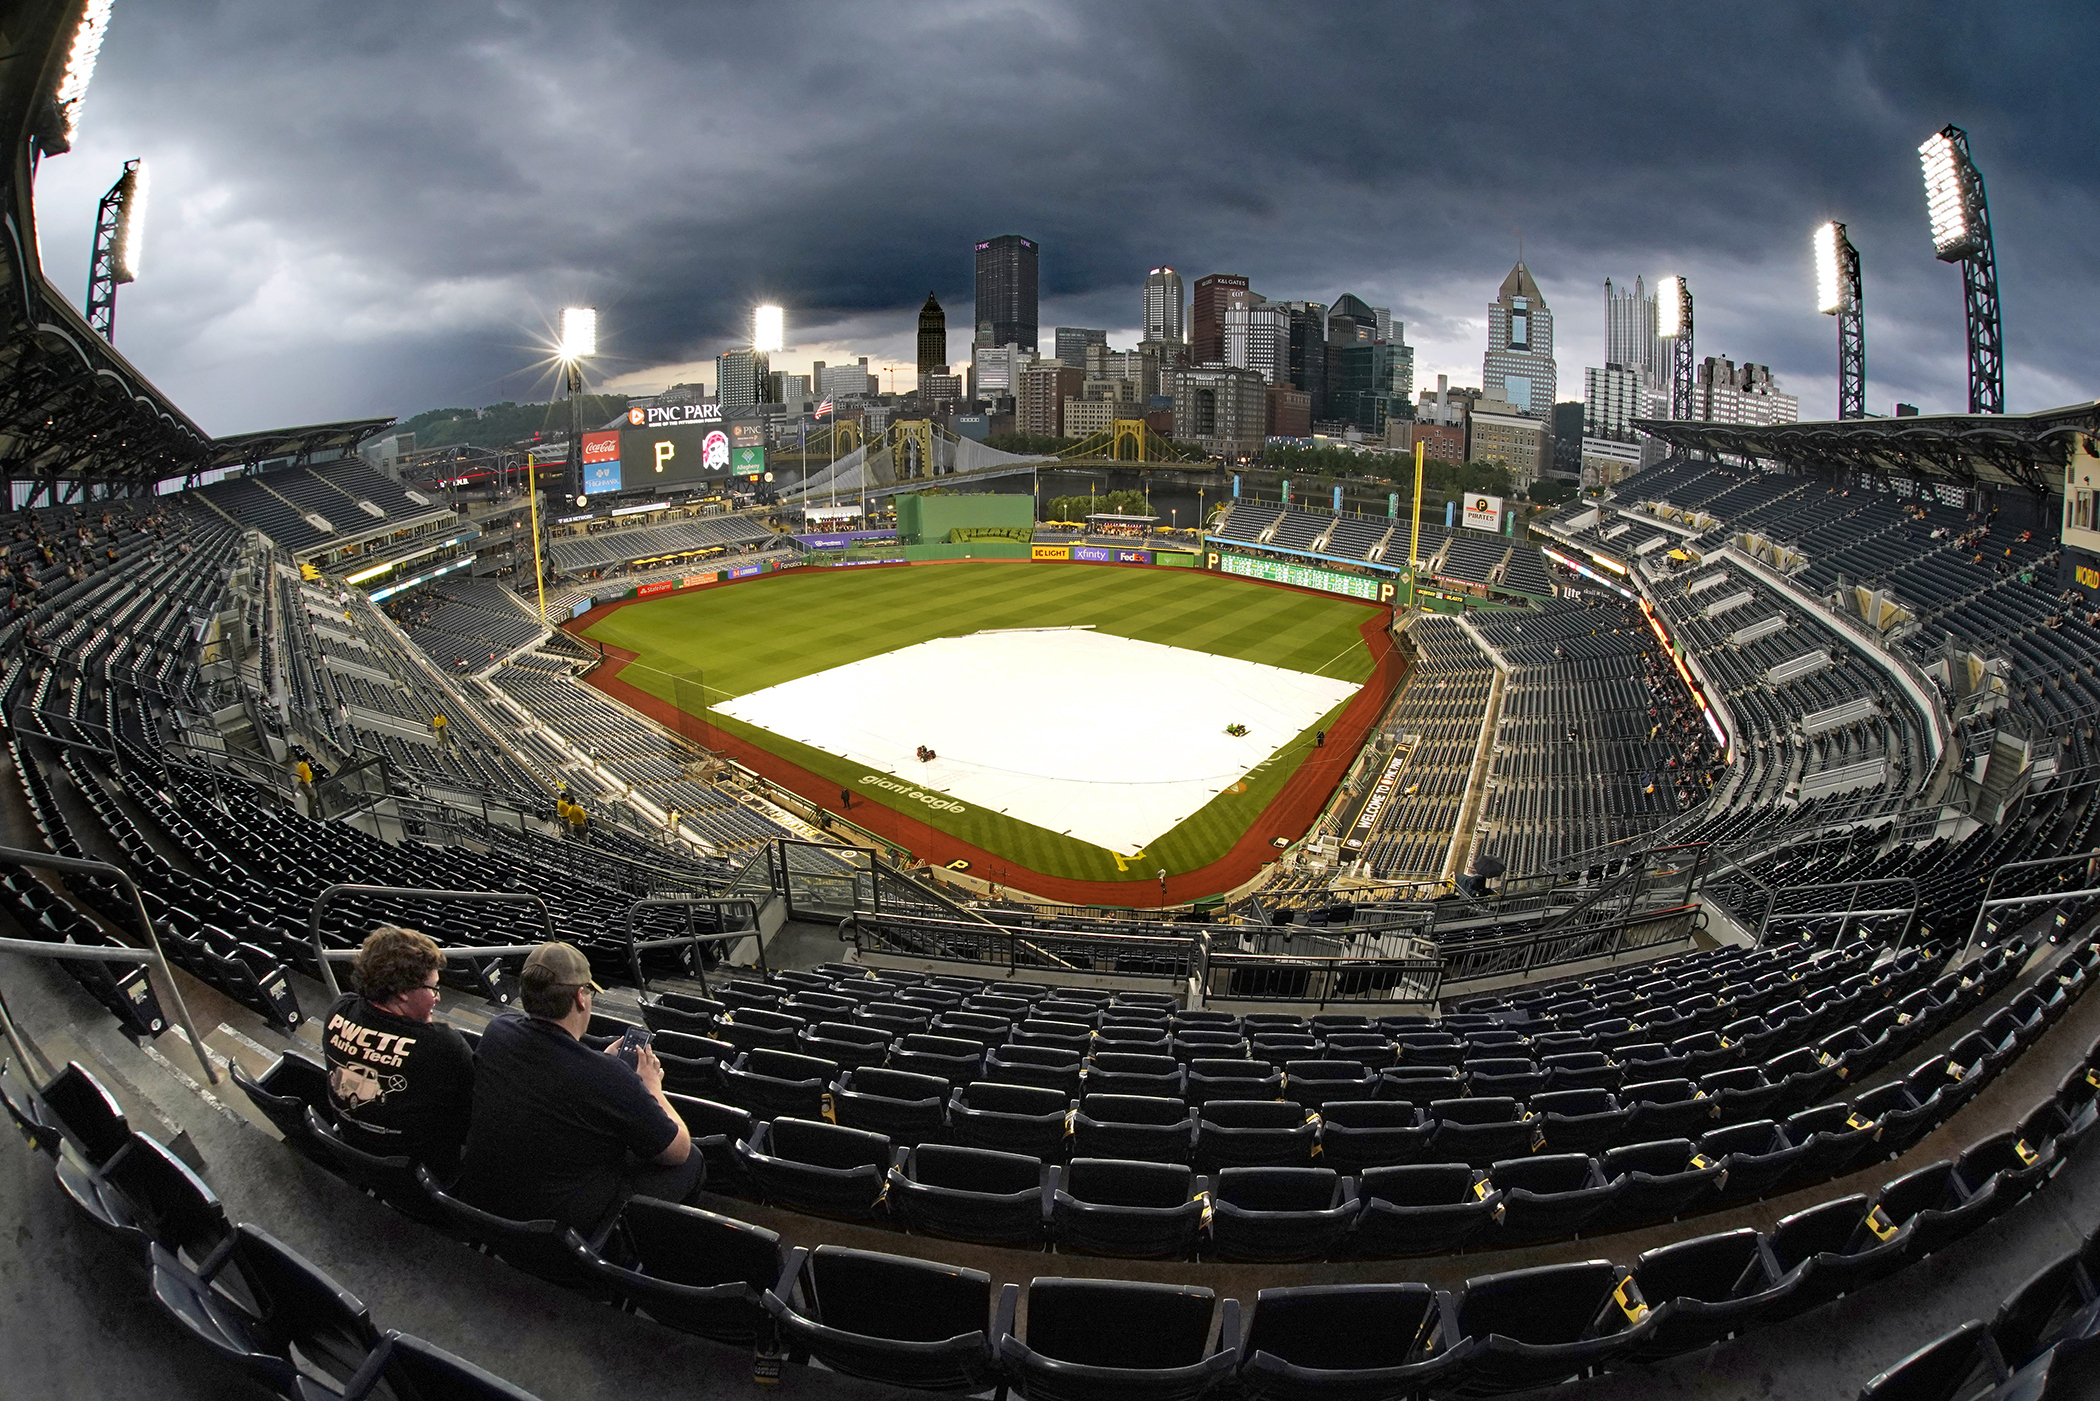 Yankees-Pirates weather forecast calls for rain, thunderstorms at